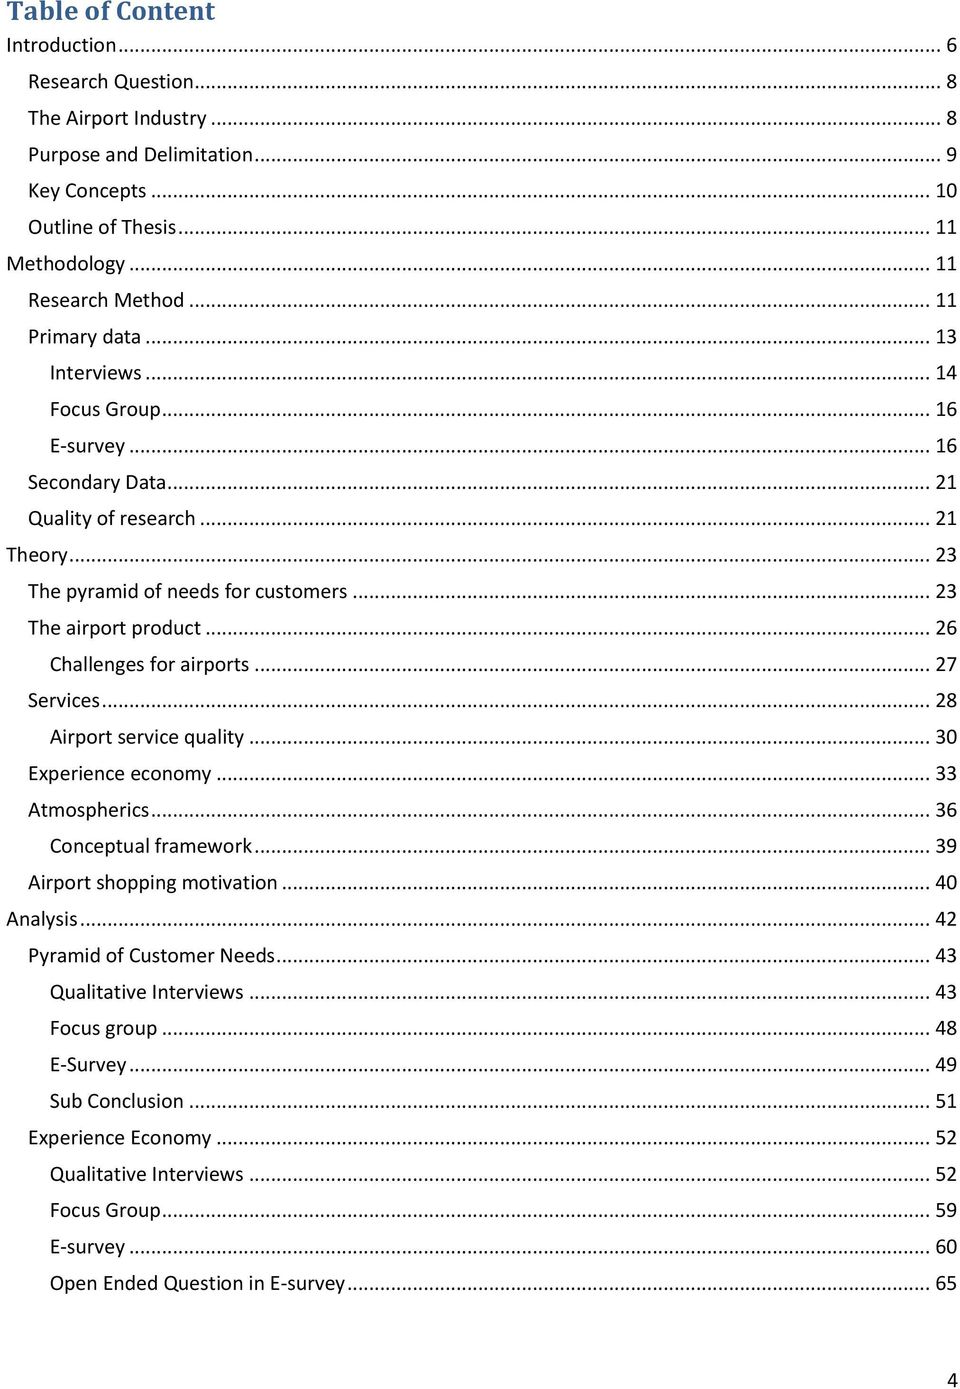 .. 26 Challenges for airports... 27 Services... 28 Airport service quality... 30 Experience economy... 33 Atmospherics... 36 Conceptual framework... 39 Airport shopping motivation... 40 Analysis.